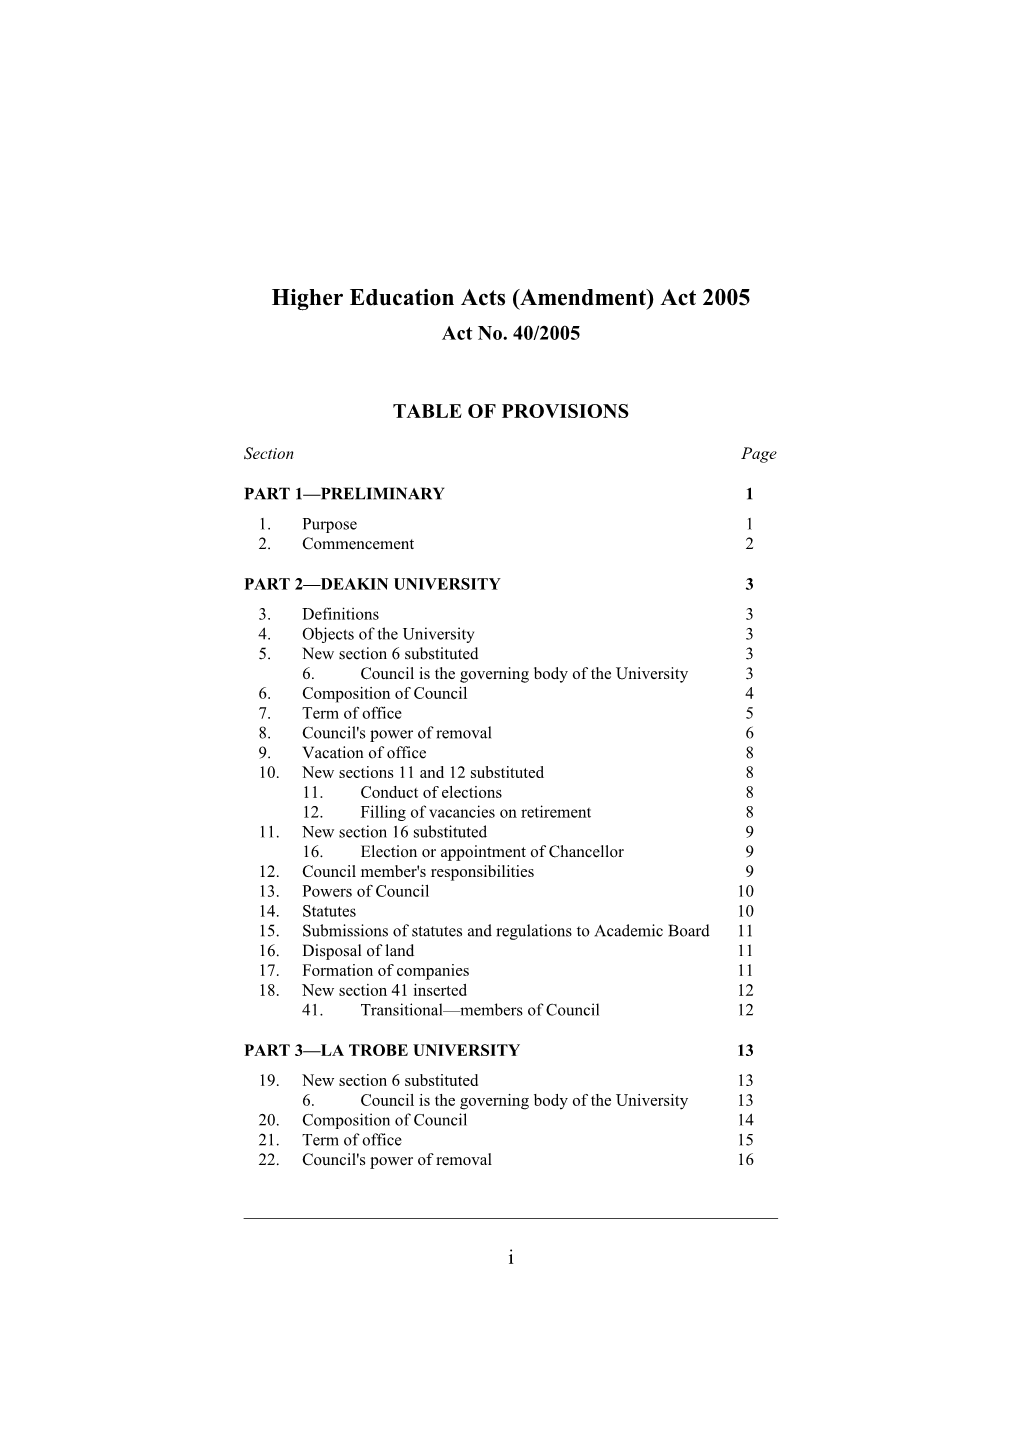 Higher Education Acts (Amendment) Act 2005